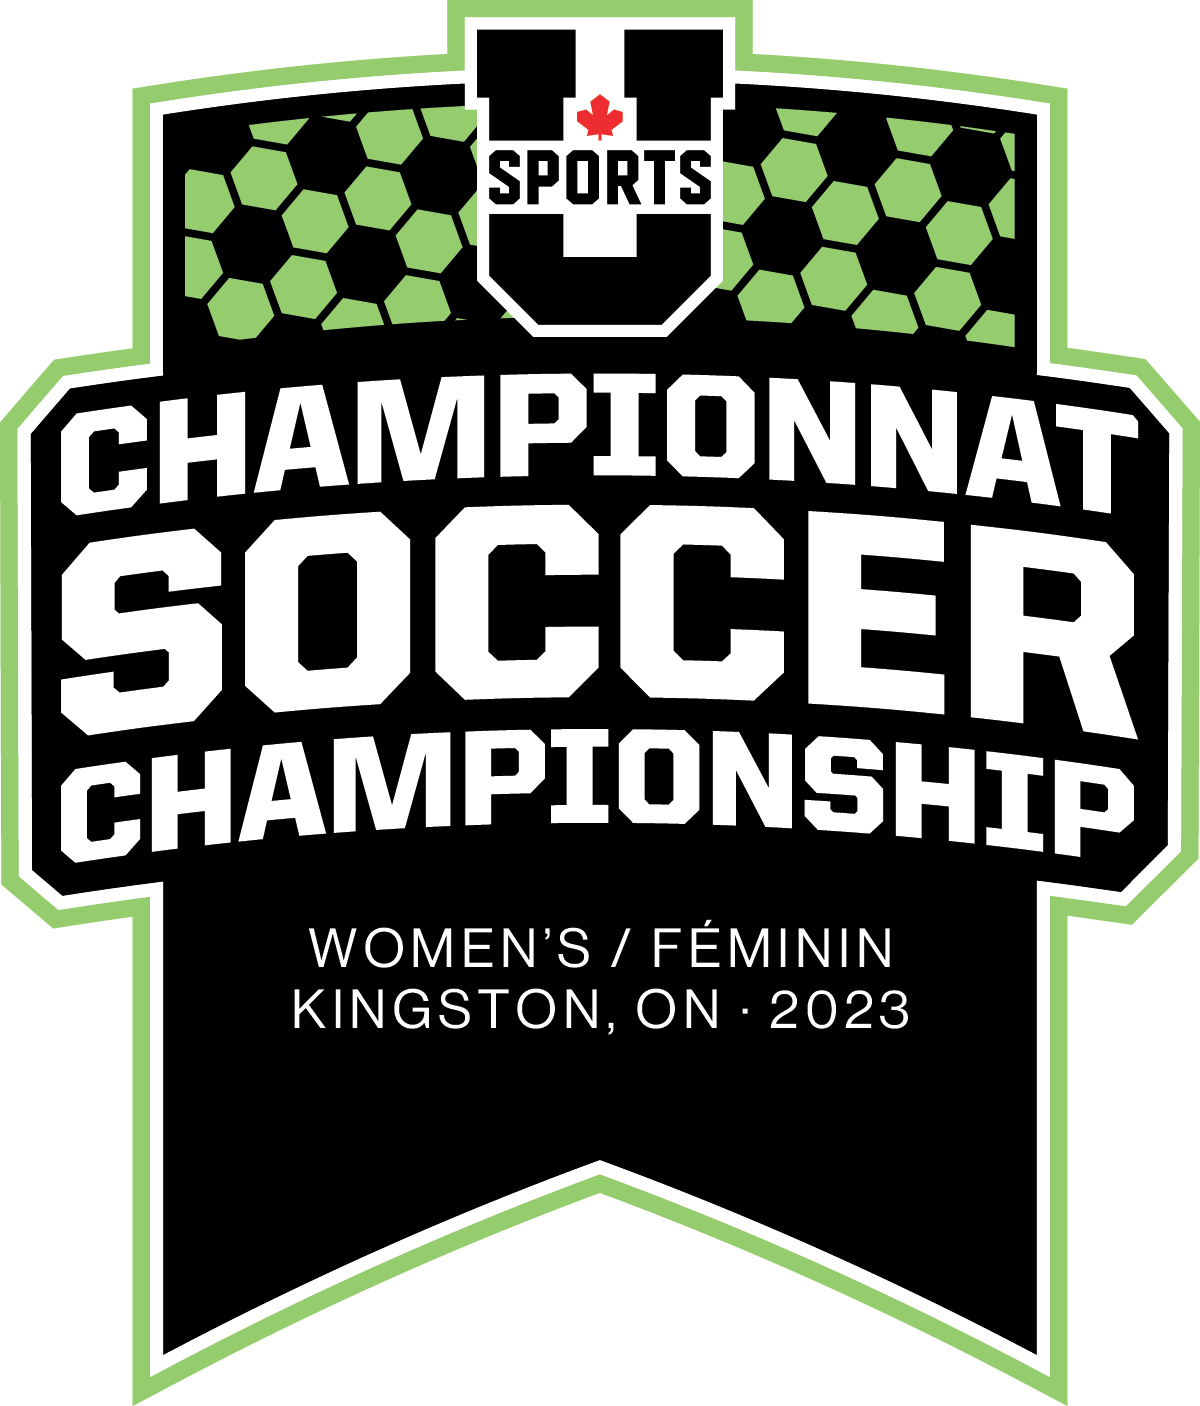 USports_Champ2324_SoccerW_Primary_CMYK_BL.png (102 KB)